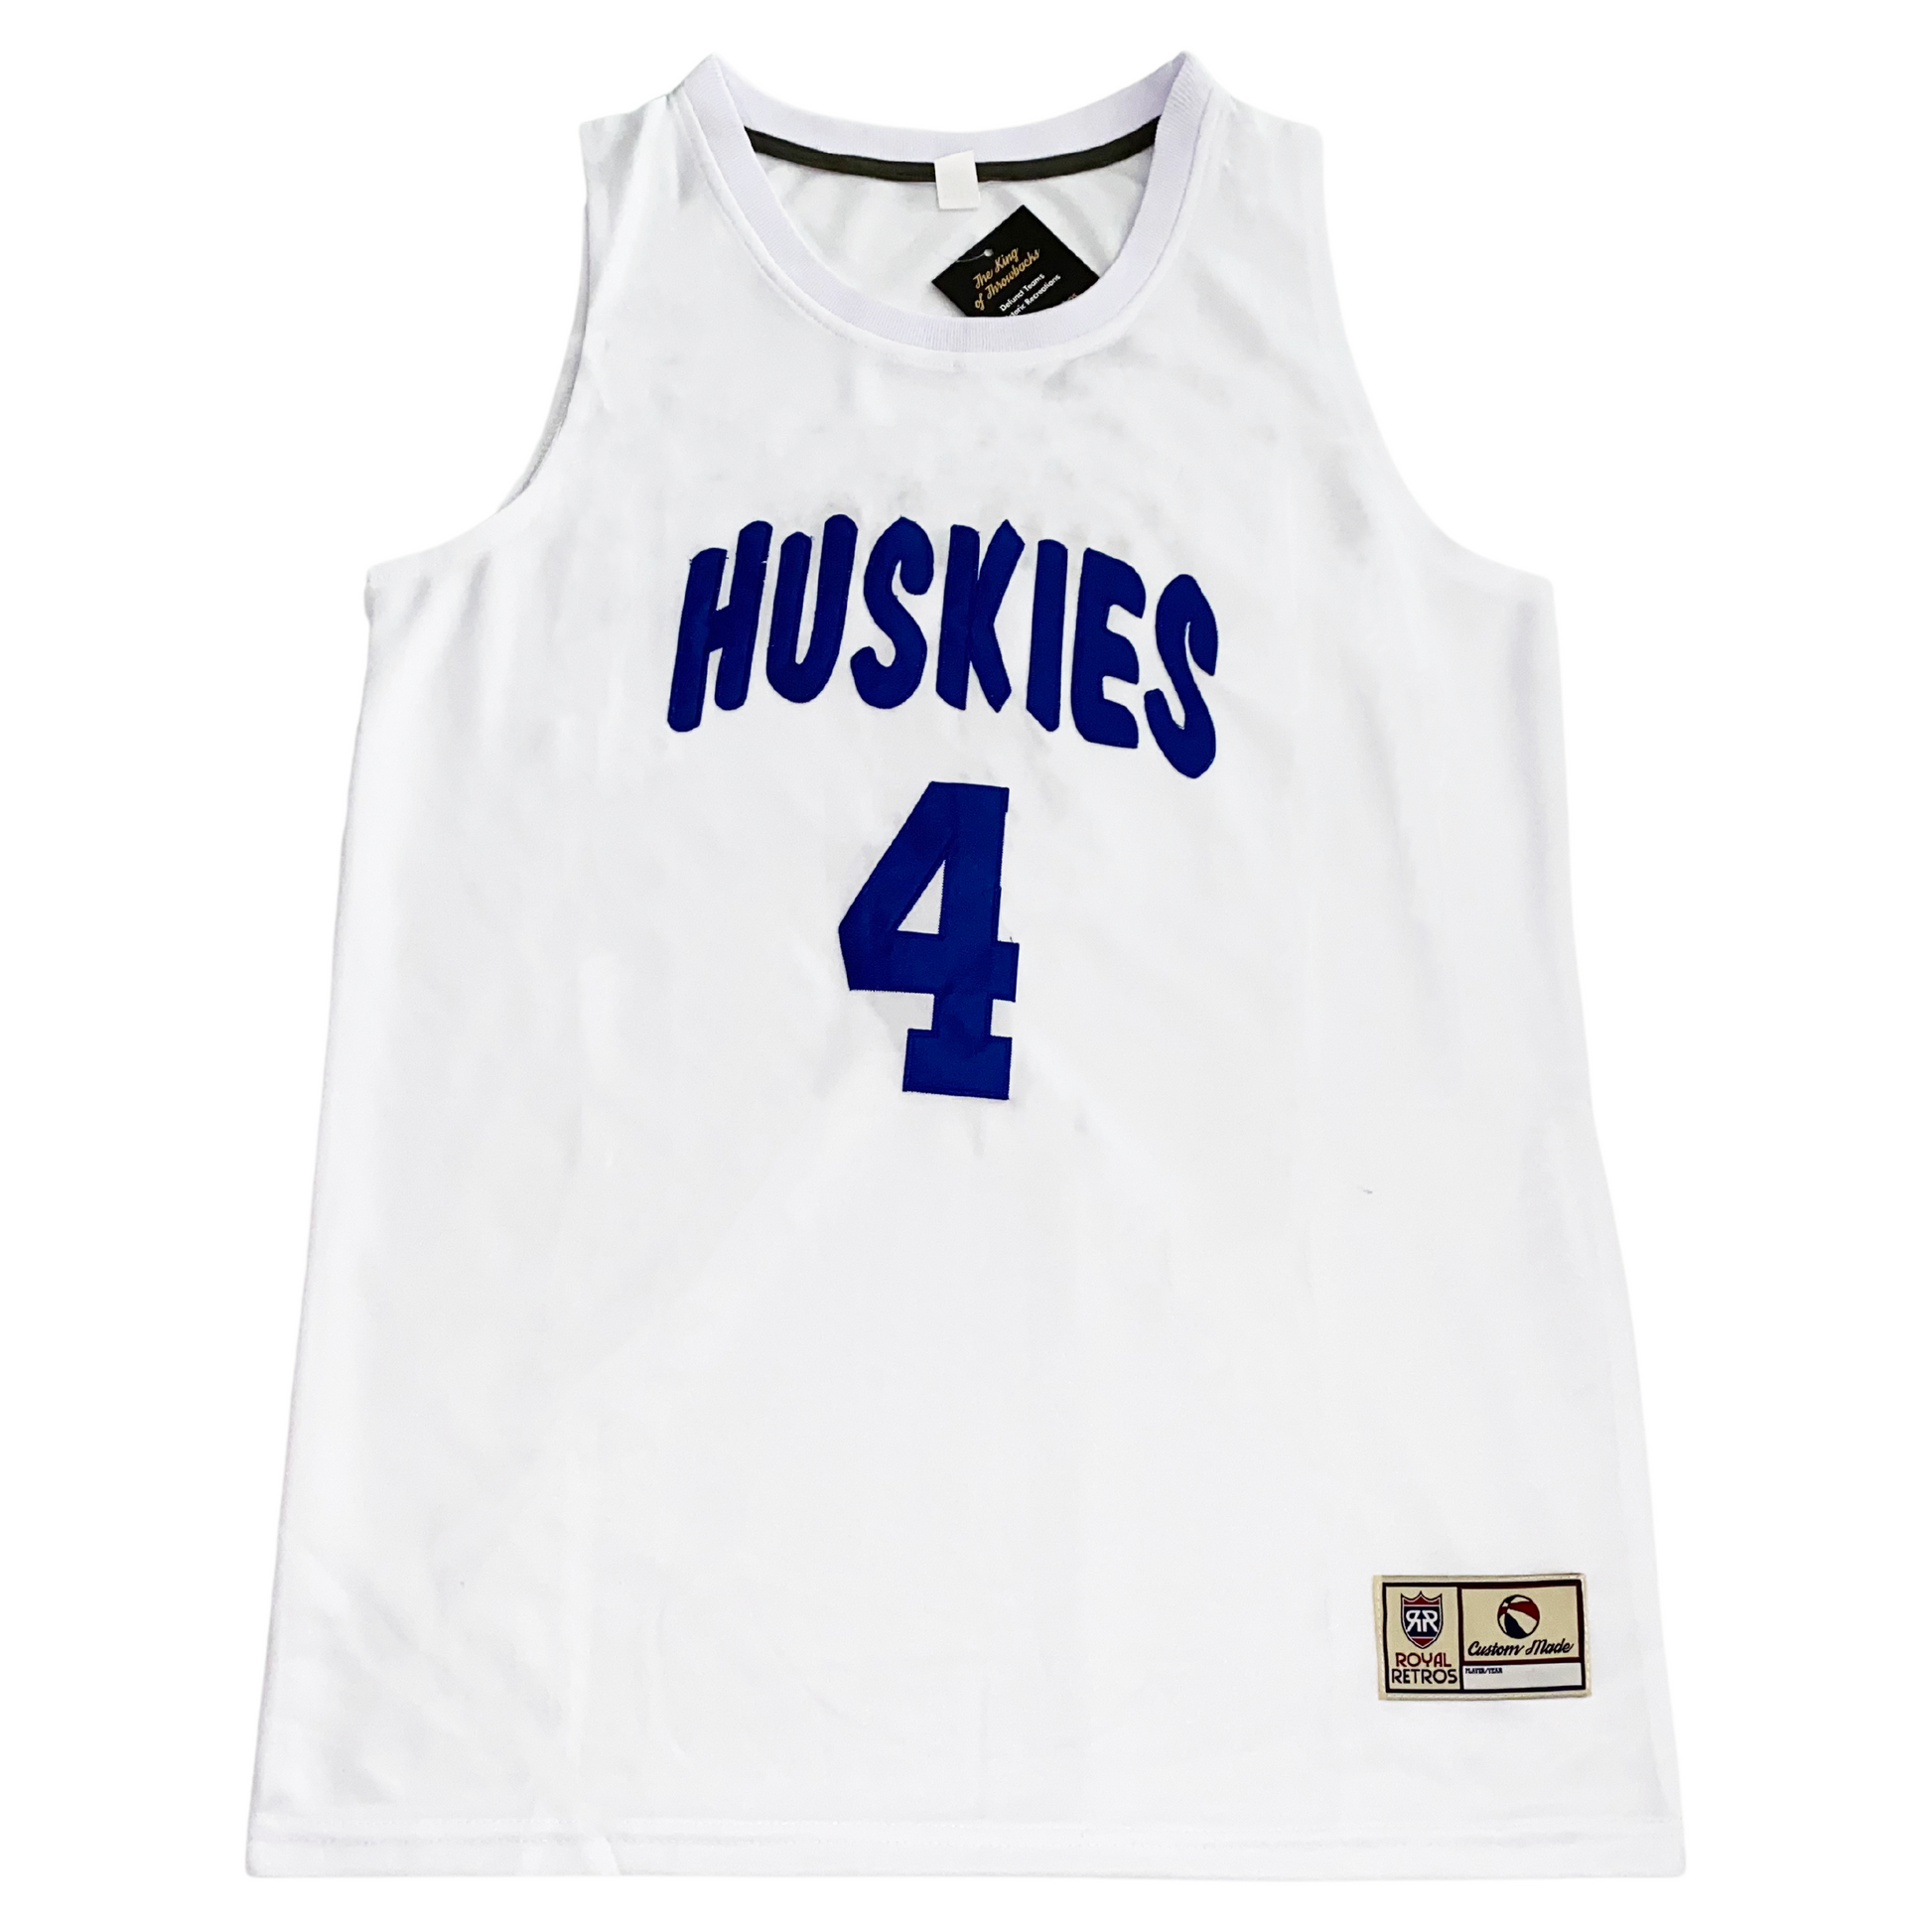 Toronto Huskies Officially Licensed Jerseys, Hats, and Tees – The